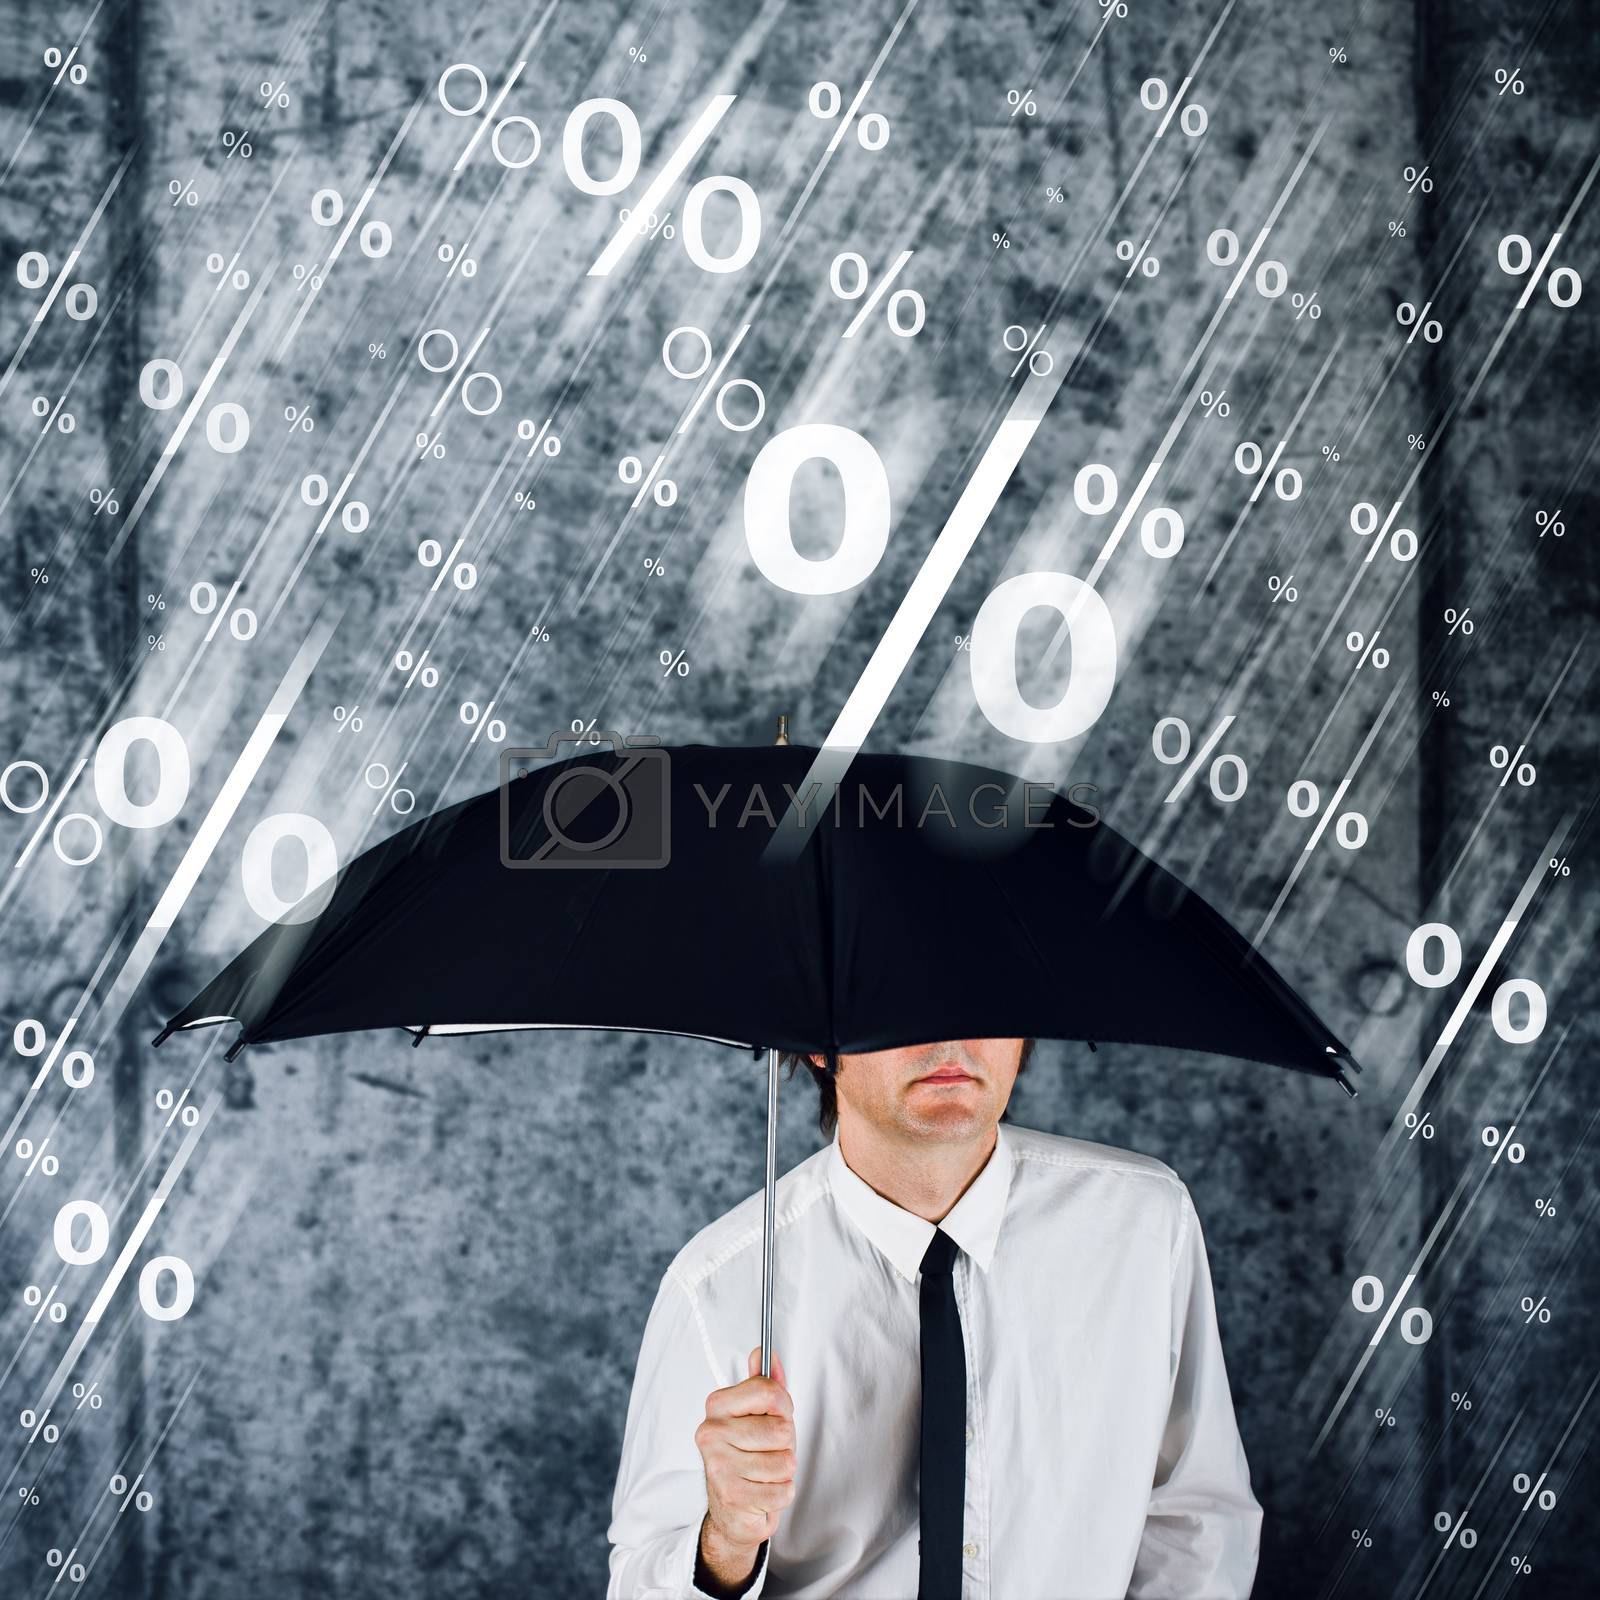 Royalty free image of Businessman with umbrella protecting himself from percentage rai by stevanovicigor